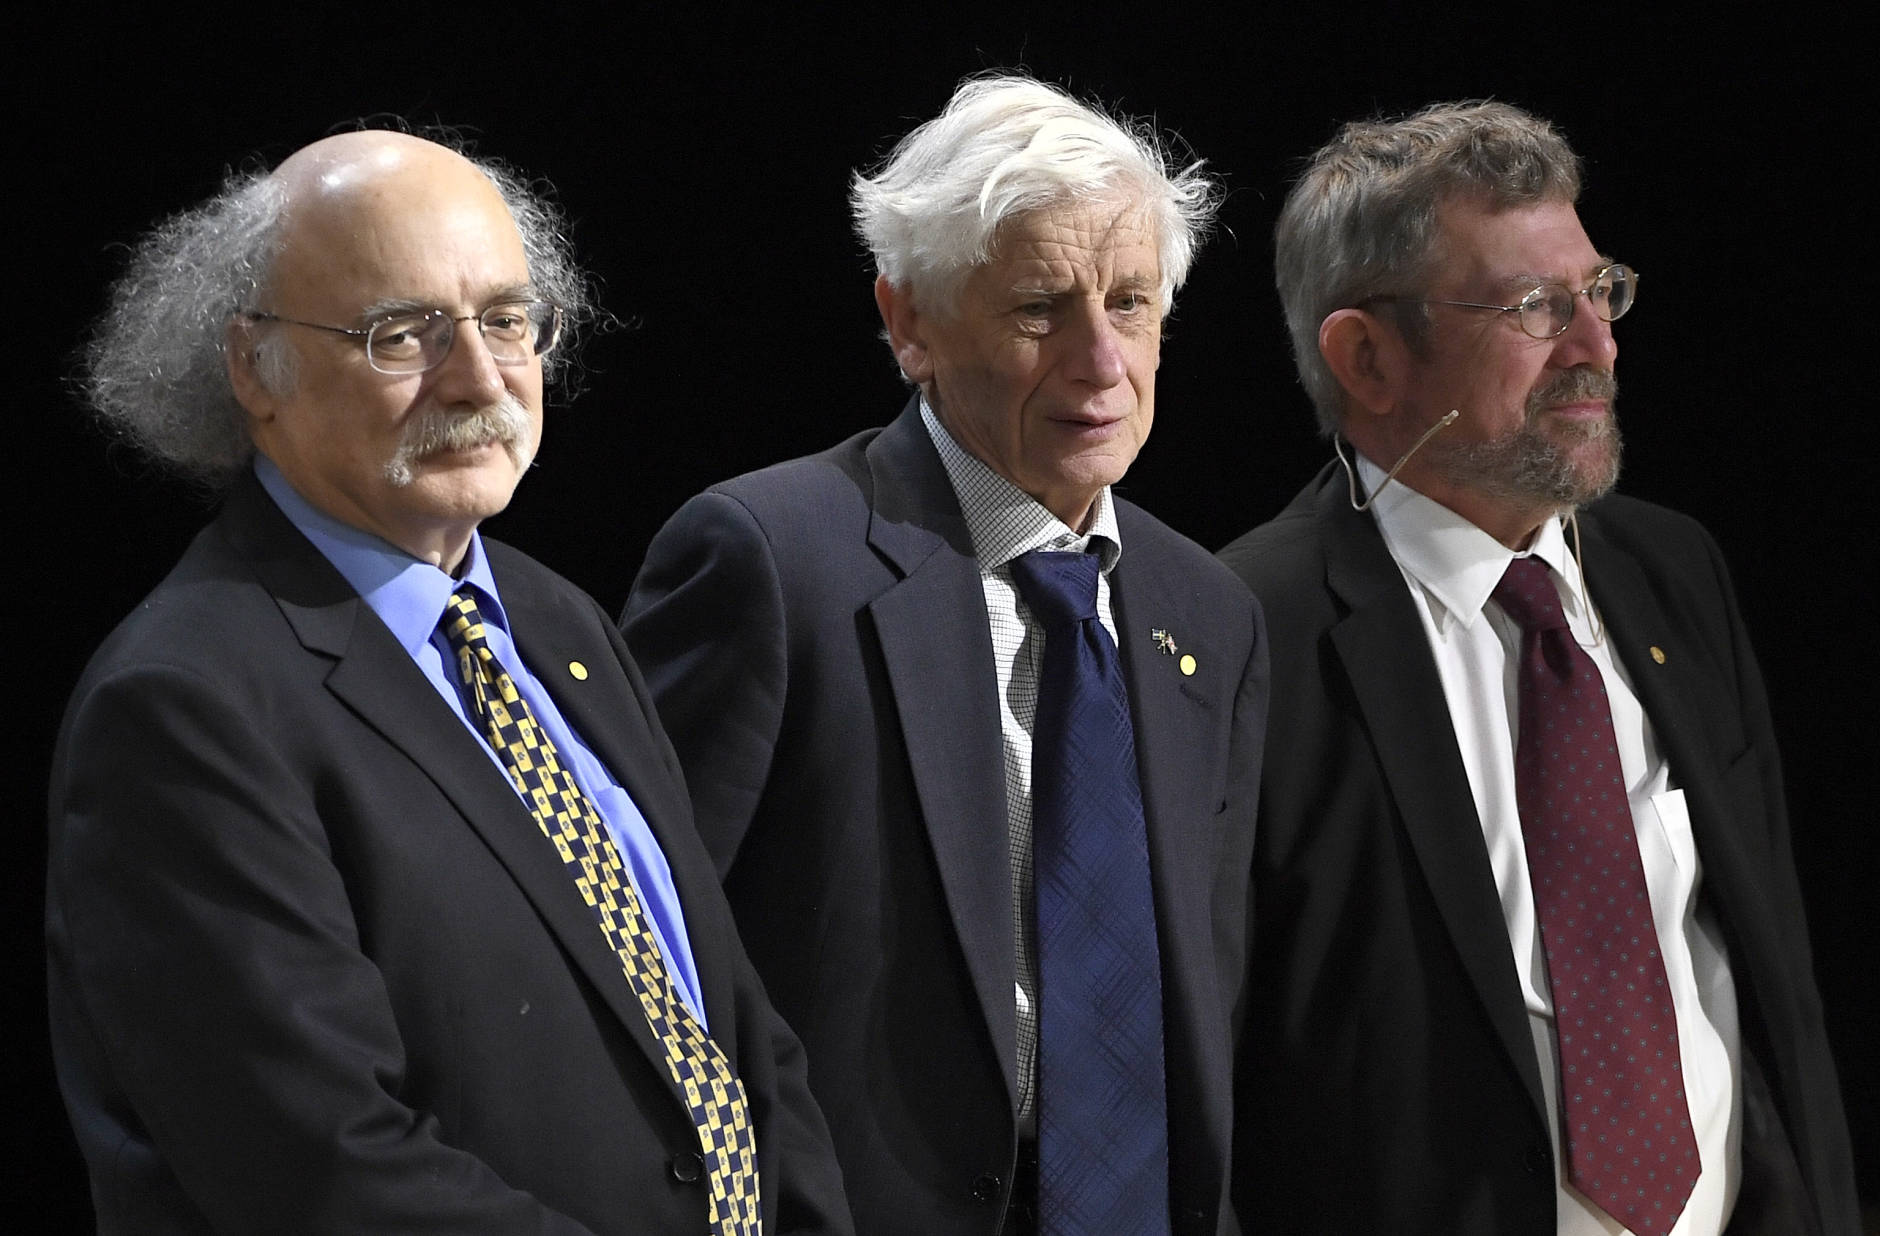 The Nobel Prize in Physics laureates F. Duncan M. Haldane, left, David J. Thouless and J. Michael Kosterlitz, right, attend their Nobel lectures at the Aula Magna lecture hall at the Stockholm University in Stockholm, Sweden, Thursday Dec. 12, 2016. (Claudio Bresciani/TT via AP)